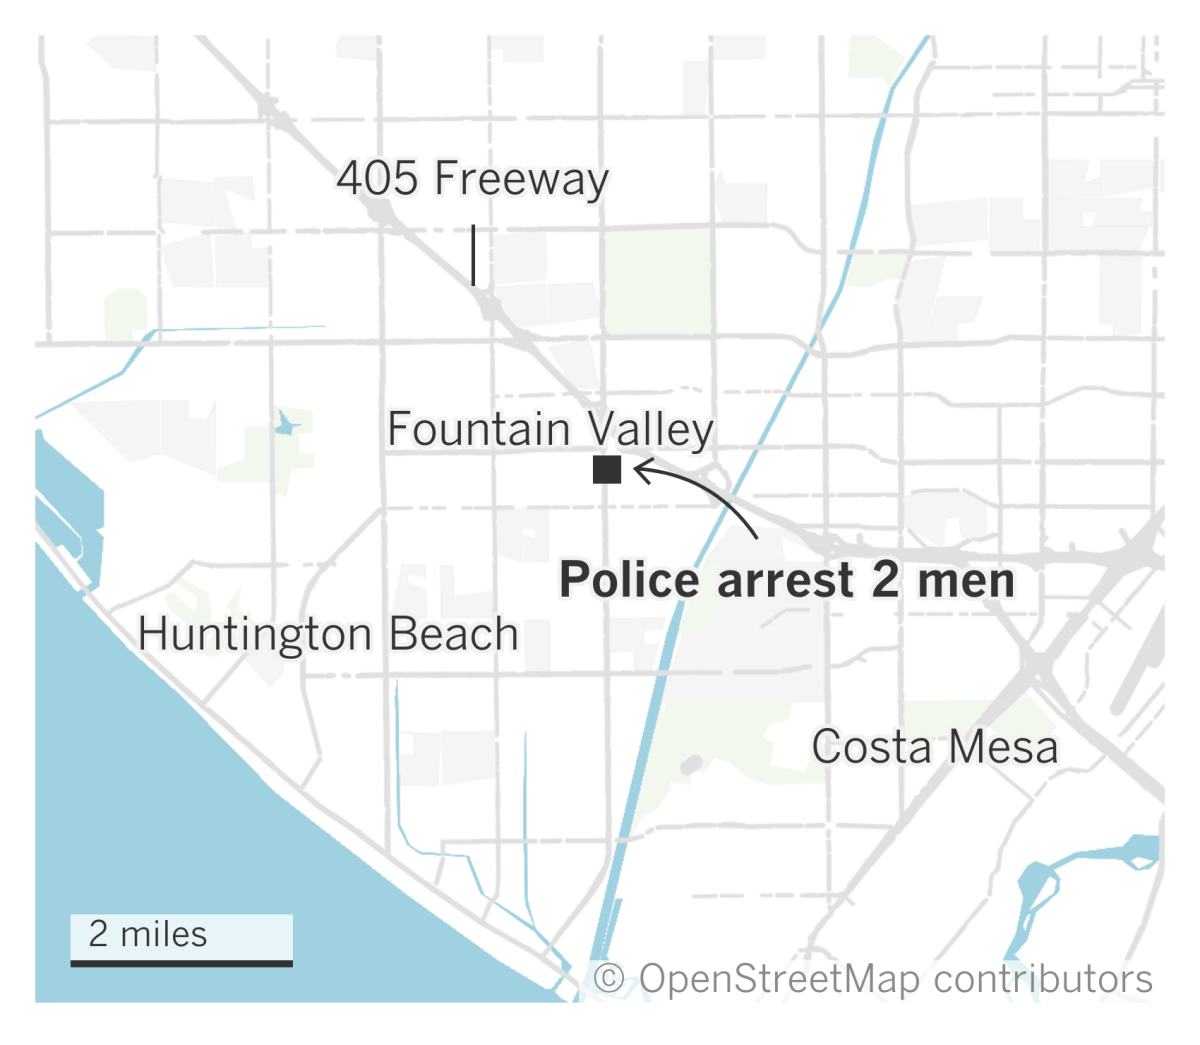 Fountain Valley police arrested two men.